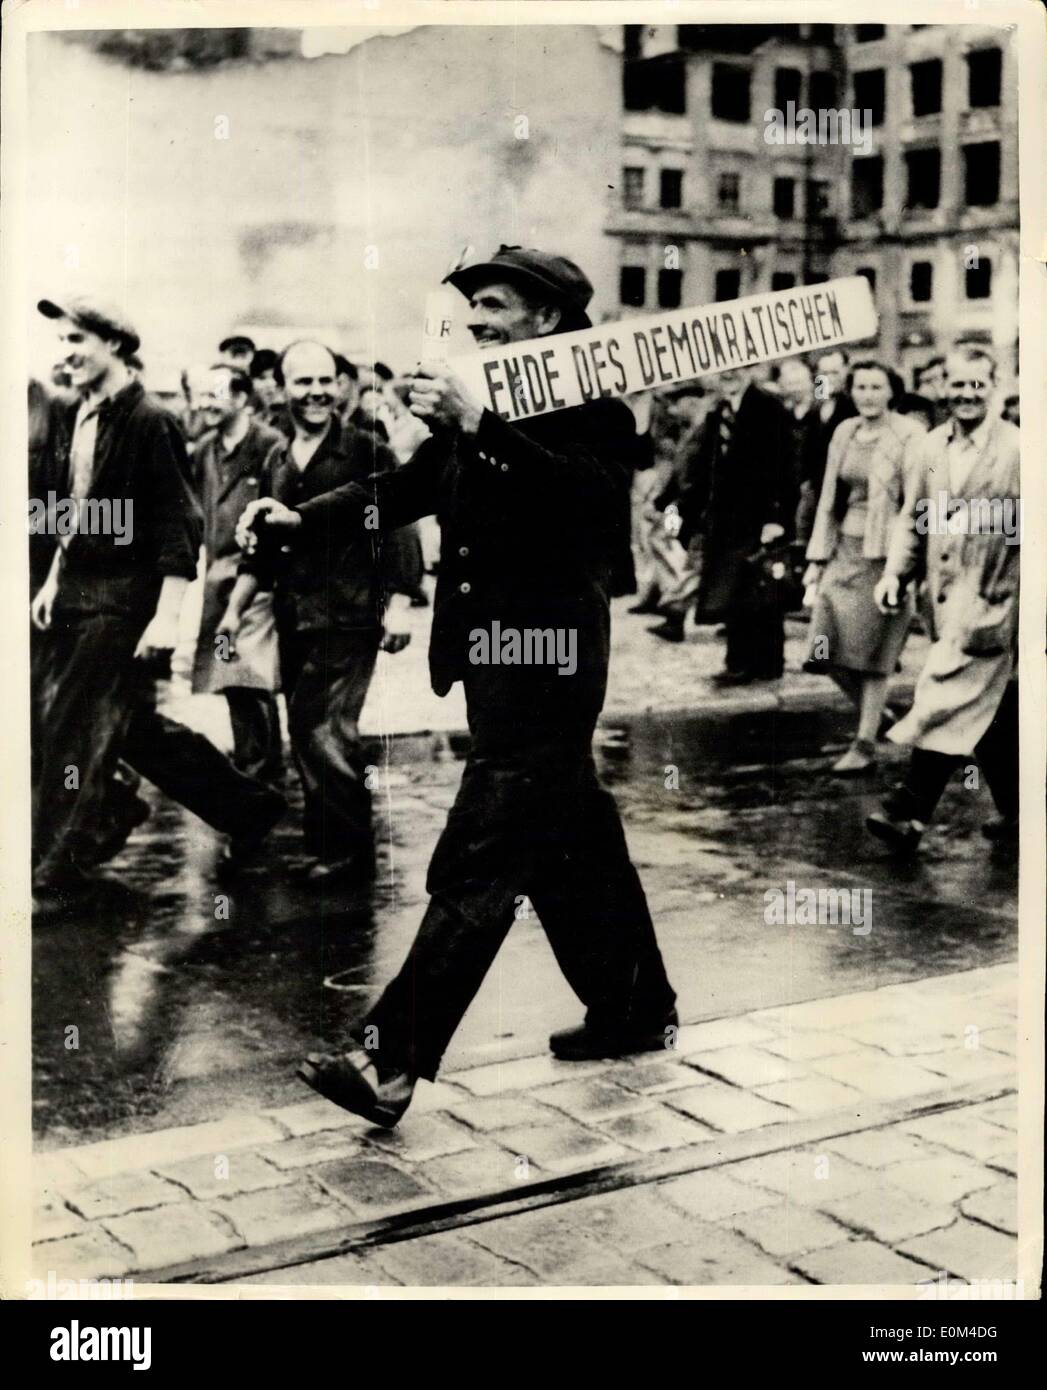 Jun. 19, 1953 - Riots And Demonstrations In East Berlin.. Workers In The Streets. Keystone Photo Shows:- Workers seen in the streets during the Riots and Demonstrations by 100,000 workers in East Berlin.. The Soviet Authorities declared Martial Law - and brought tanks into the city. Stock Photo